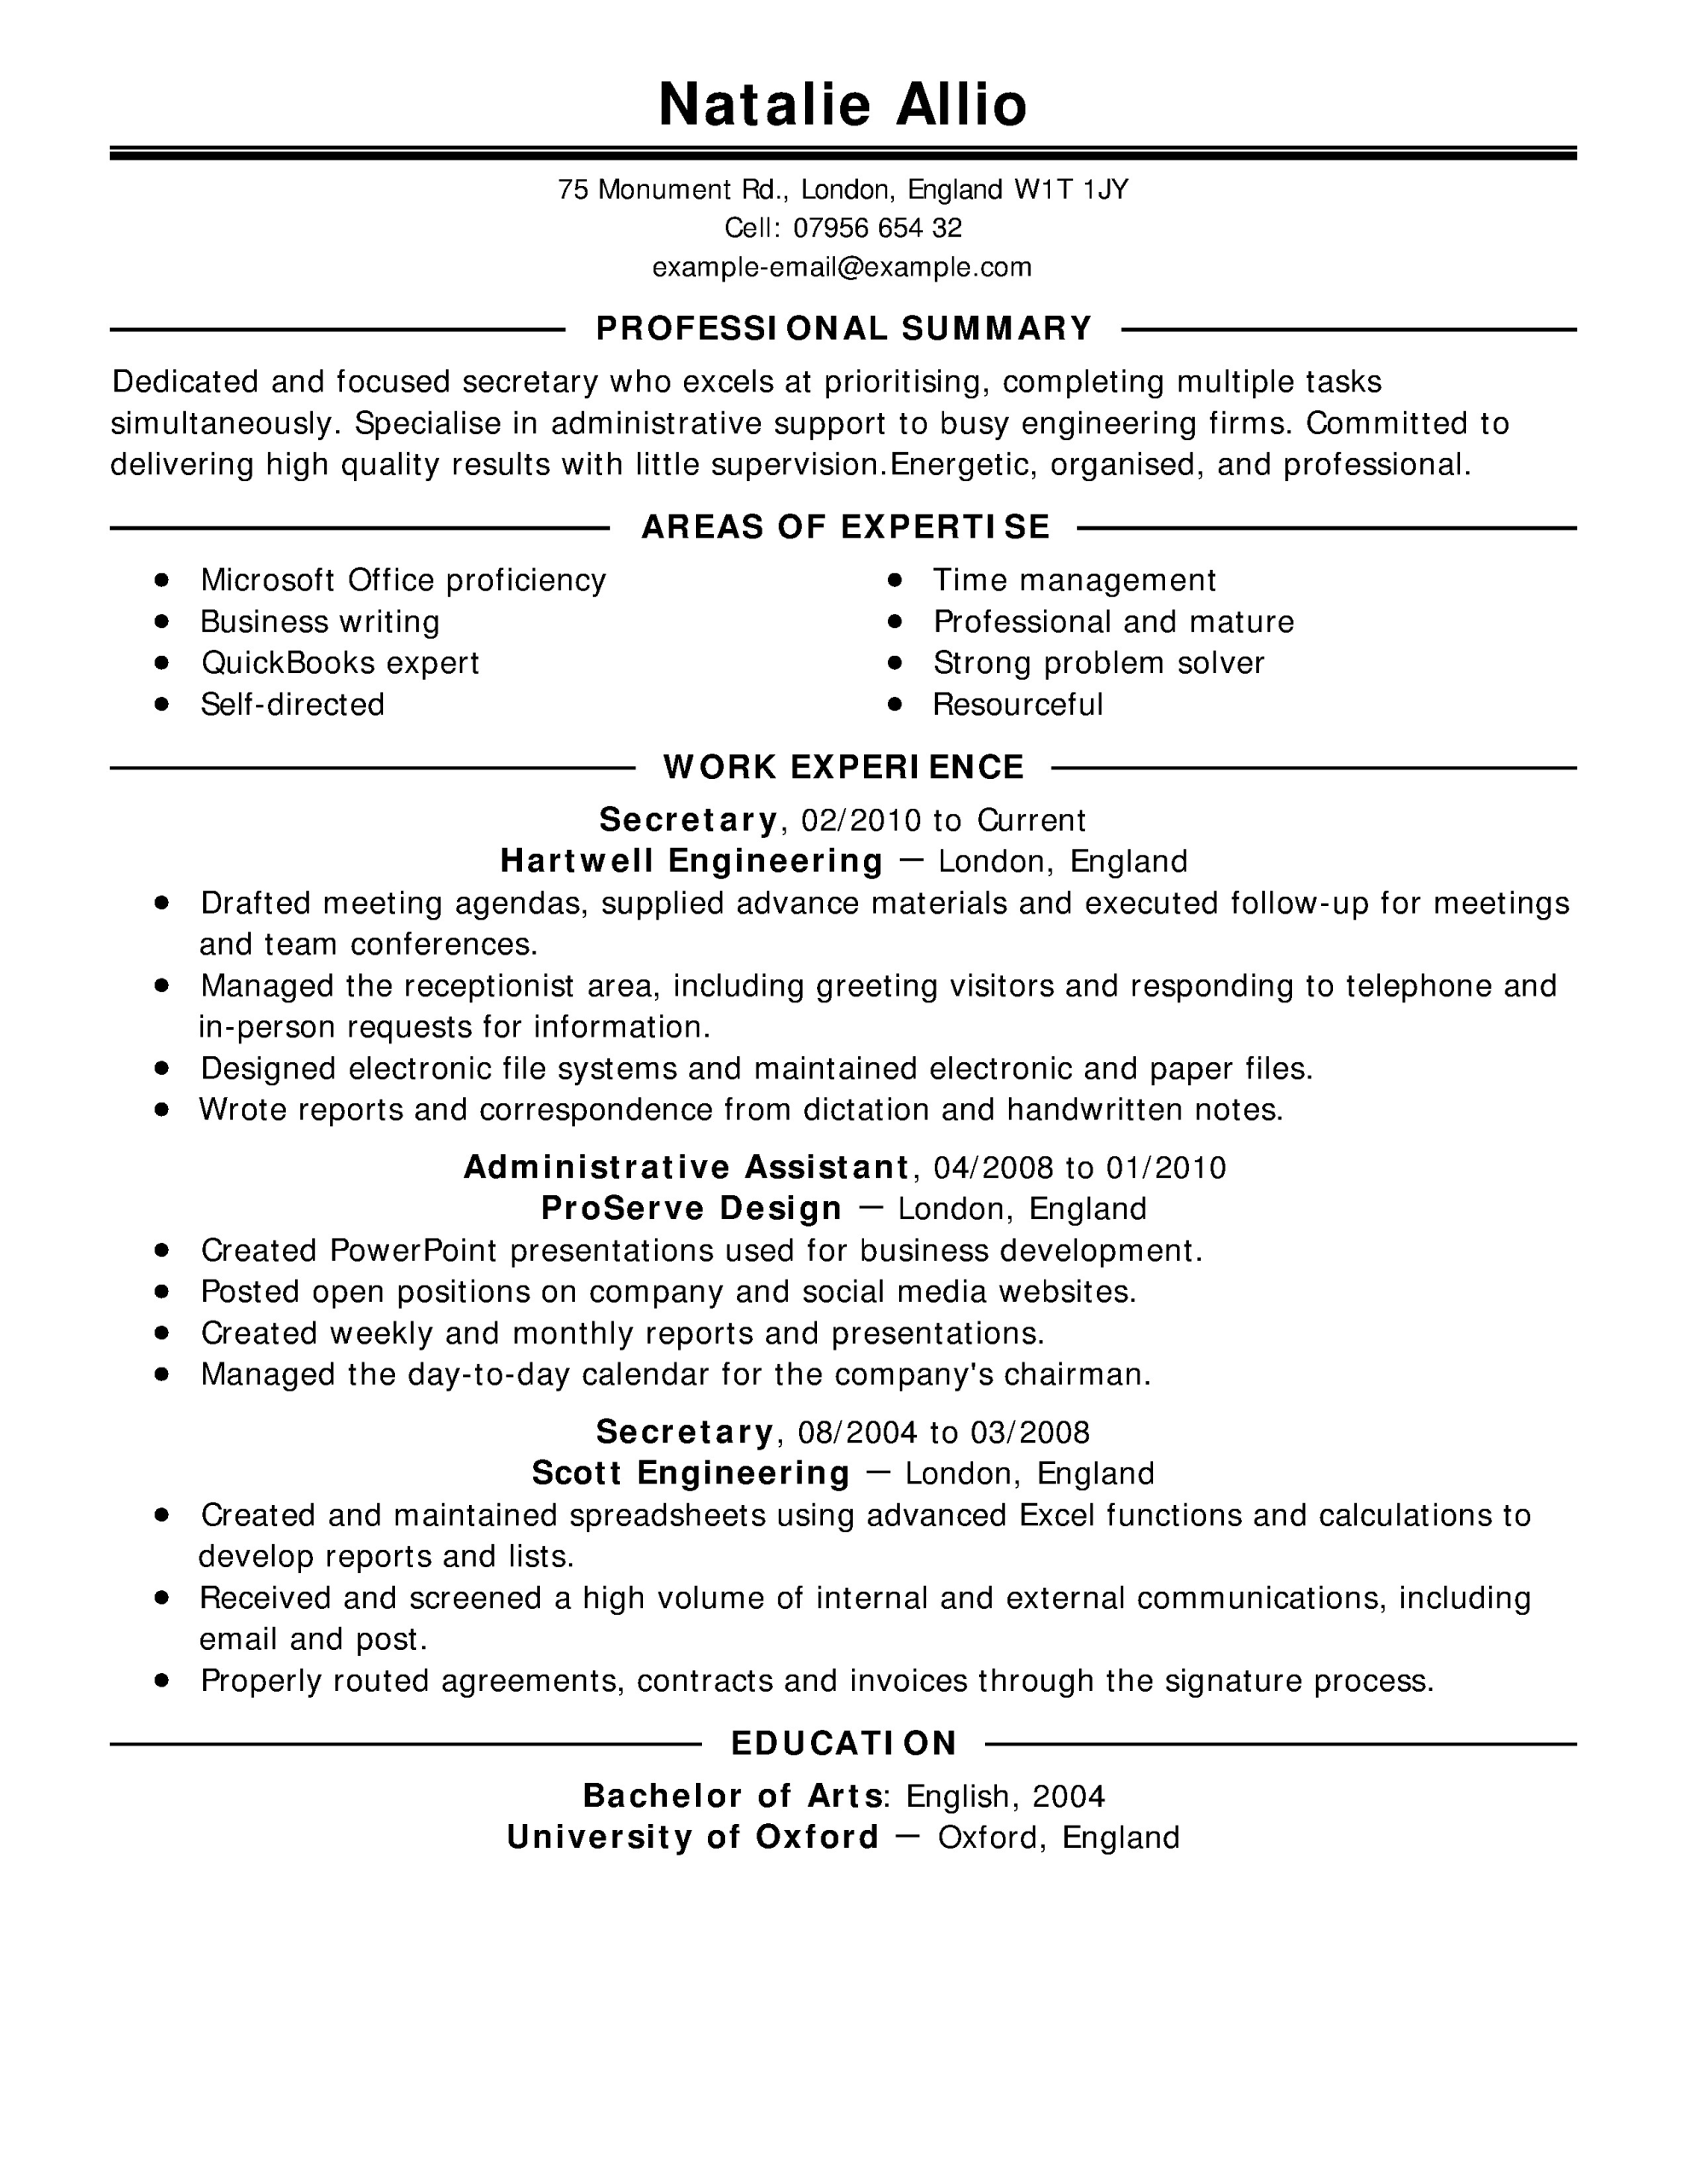 Sample Resume Applying for Any Position Free Resume Examples & Samples for All Jobseekers